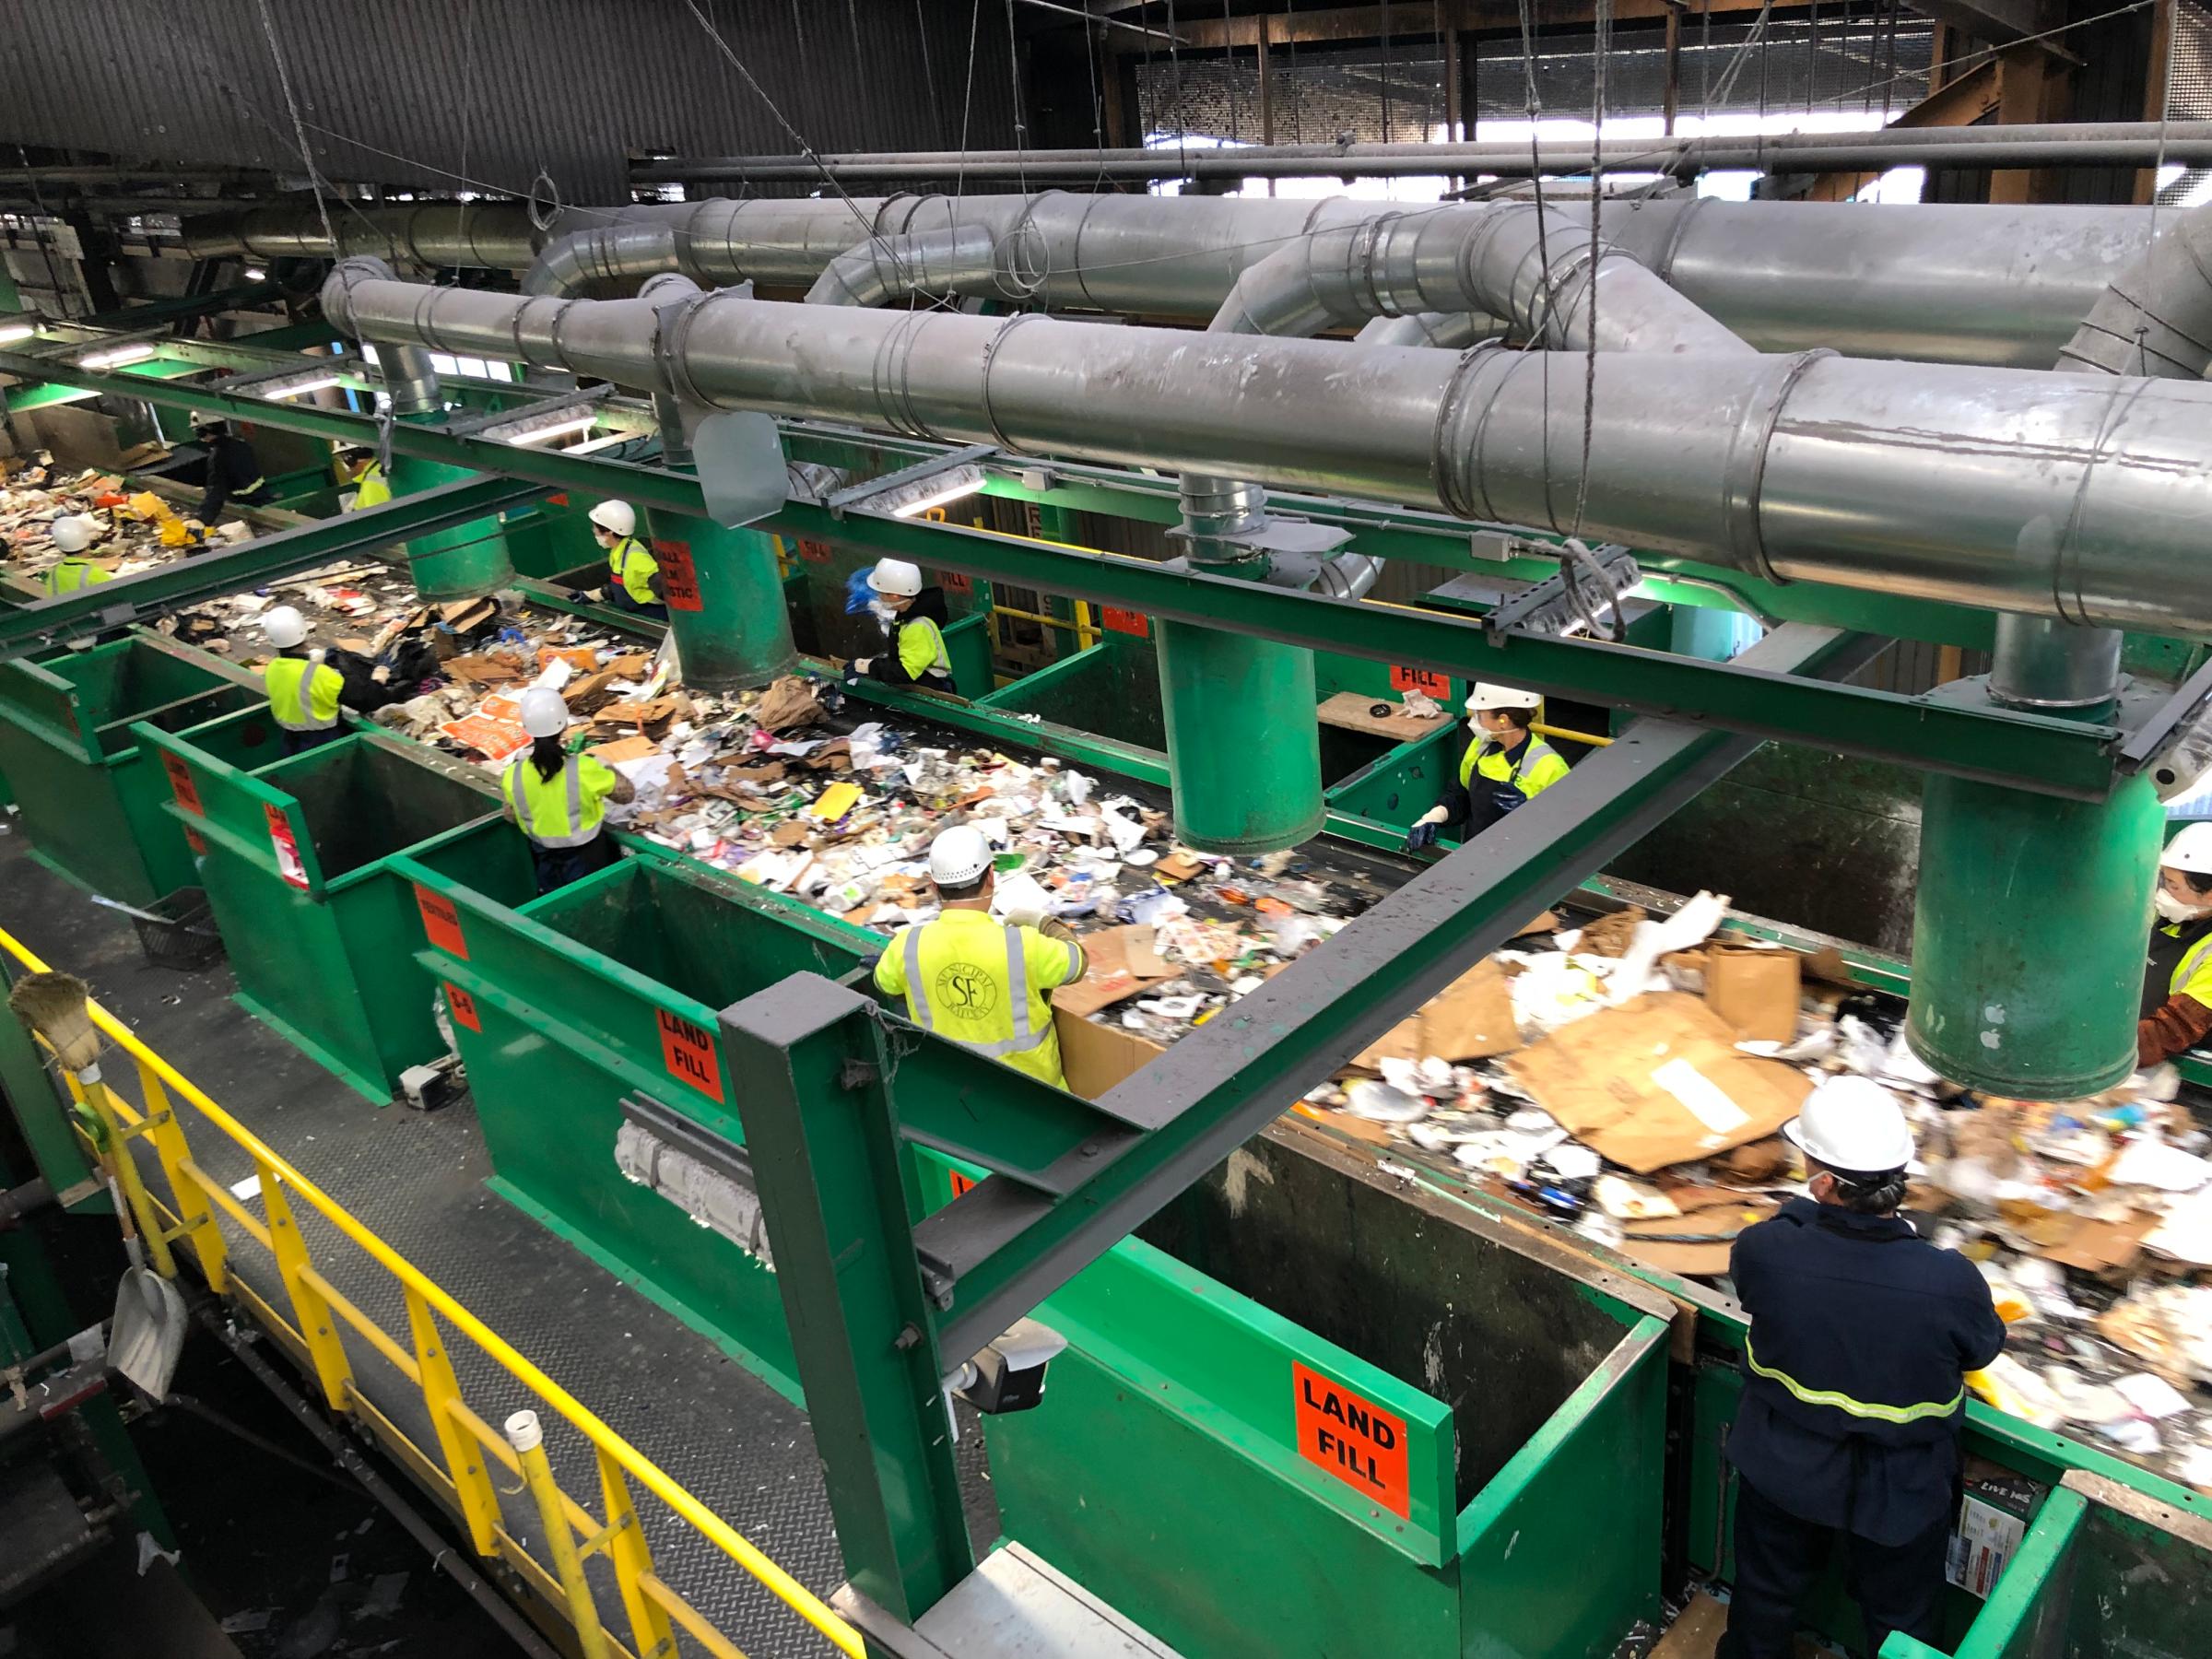 Workers sort through mixed recycling in a Recology plant in San Francisco